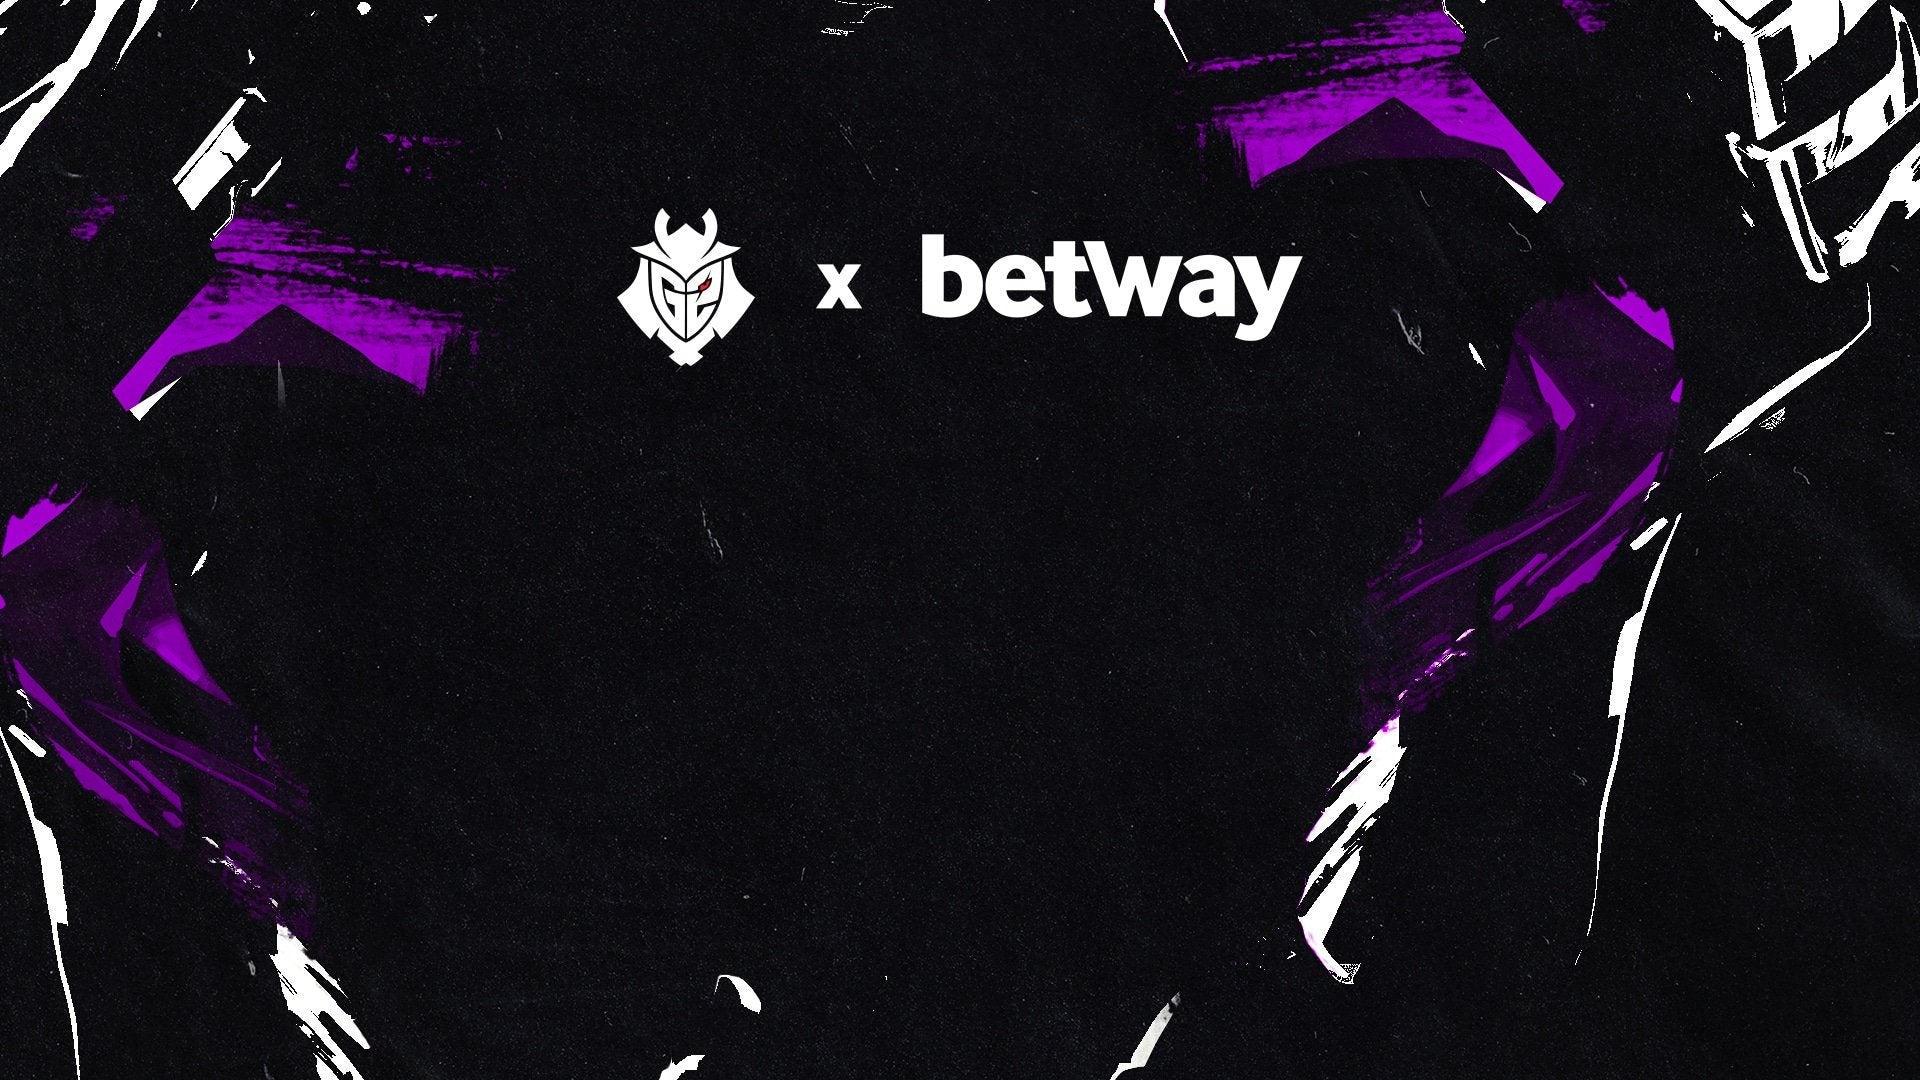 G2 ESPORTS WELCOMES BETWAY AS NEW PARTNER TO THE #G2ARMY